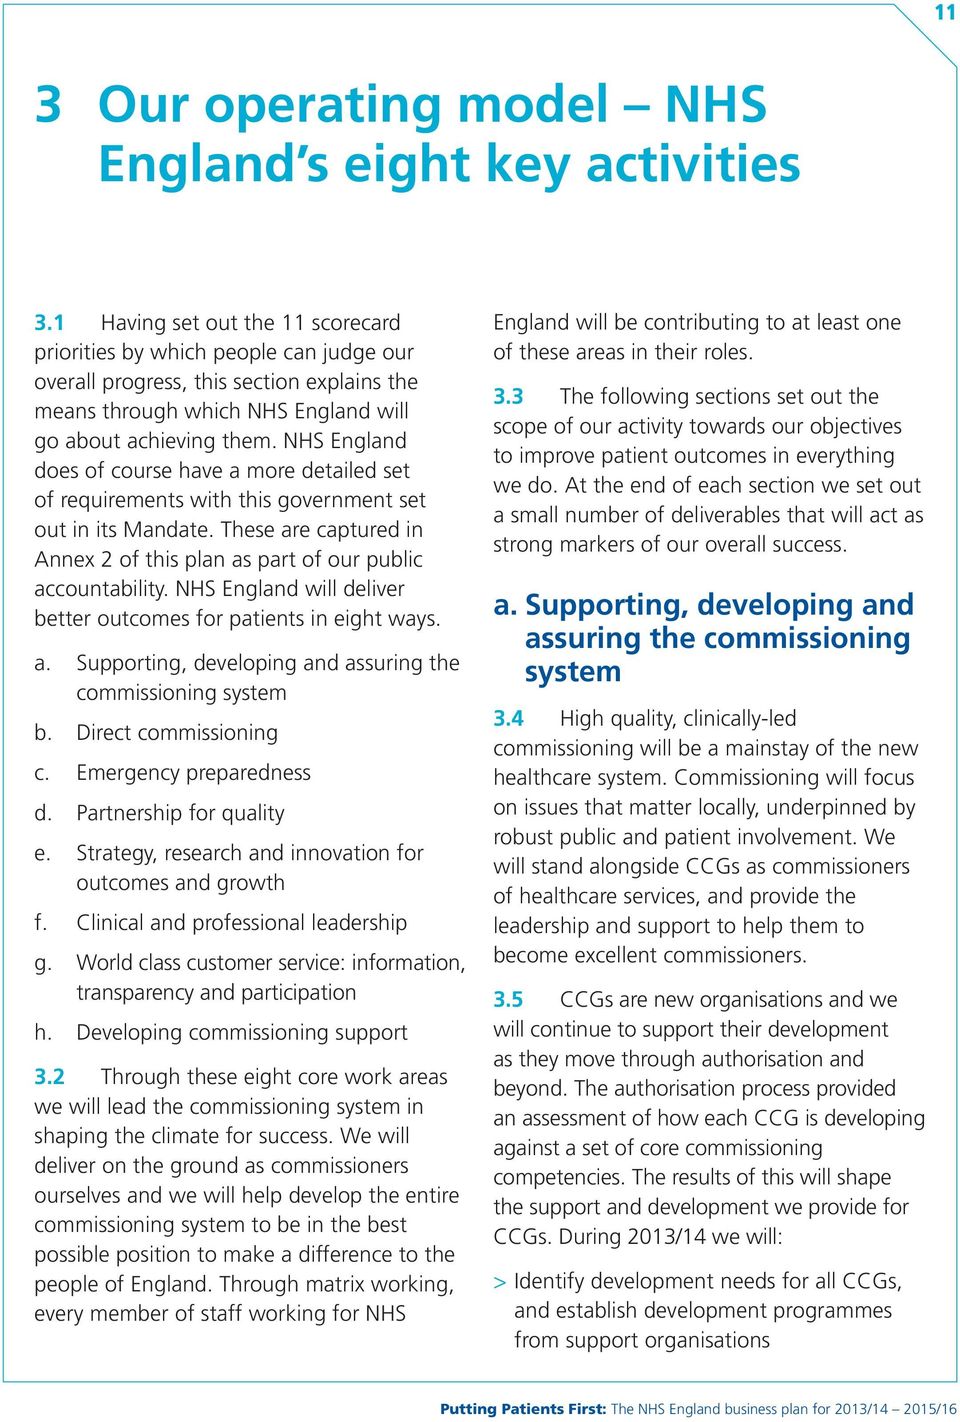 NHS England does of course have a more detailed set of requirements with this government set out in its Mandate. These are captured in Annex 2 of this plan as part of our public accountability.